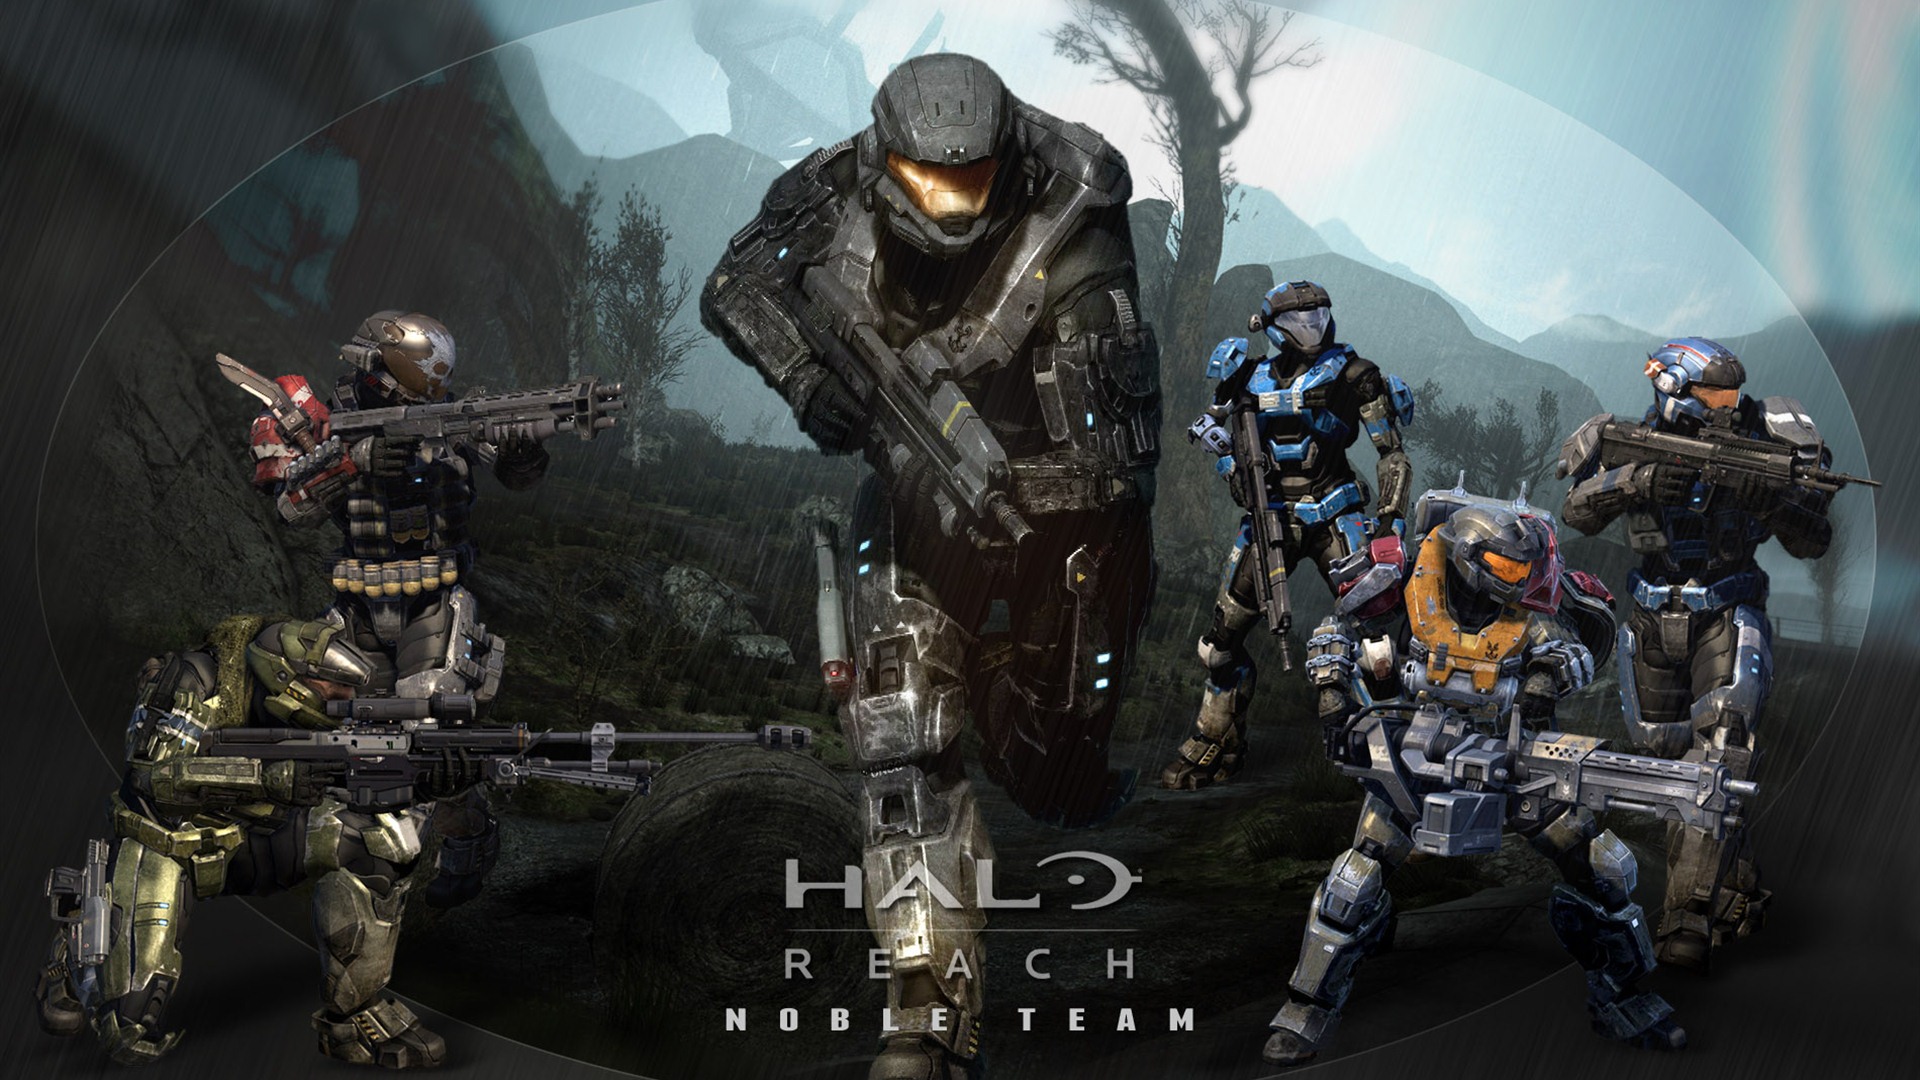 Halo Game HD Wallpapers #23 - 1920x1080